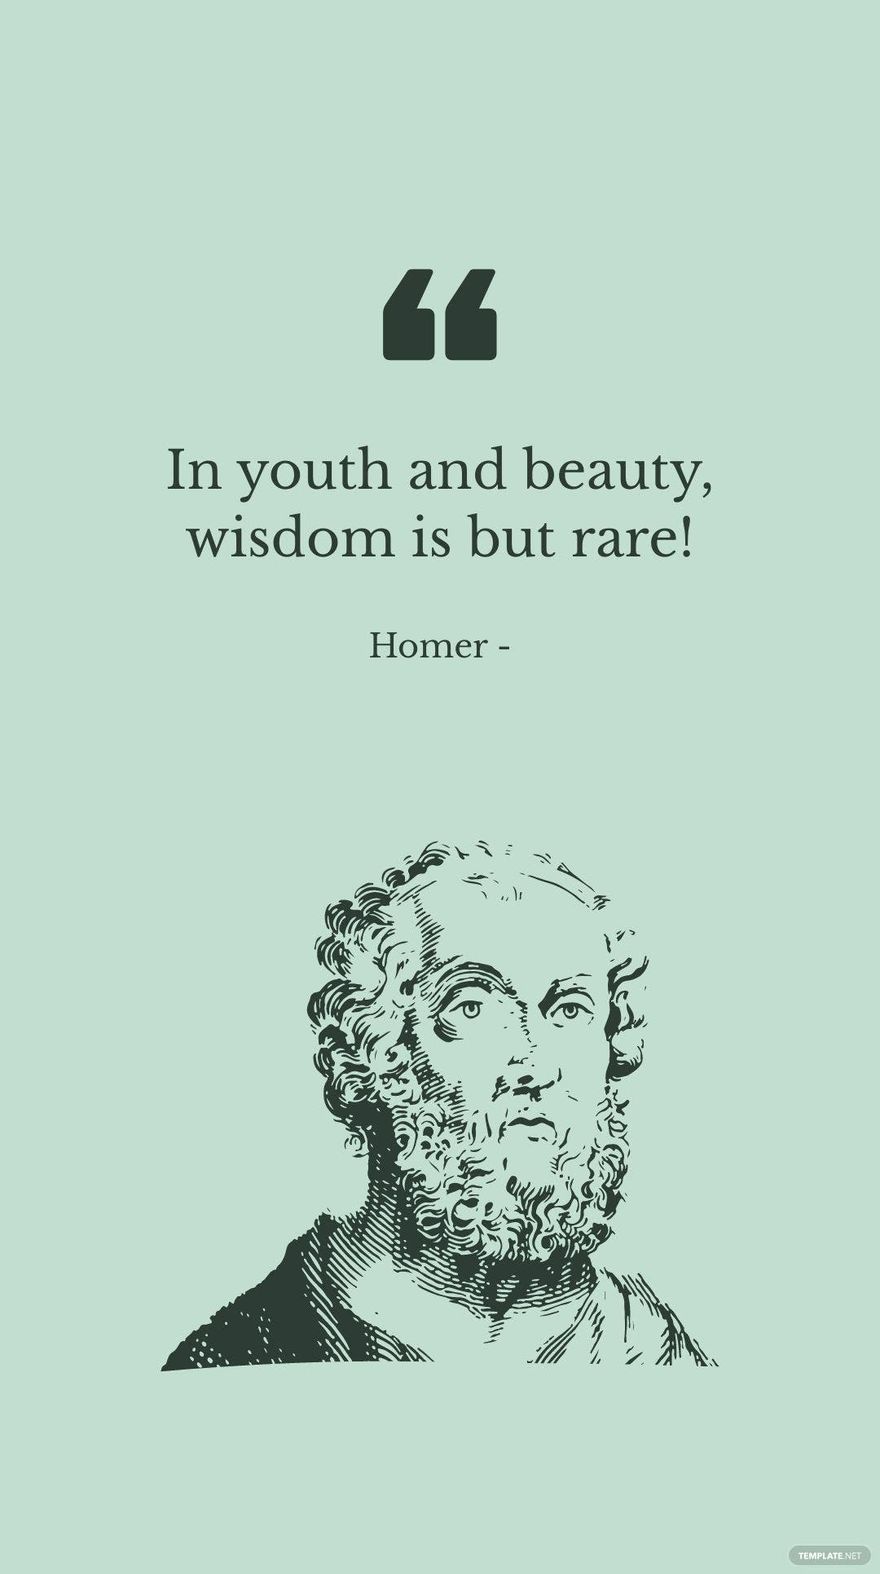 Homer - In youth and beauty, wisdom is but rare!